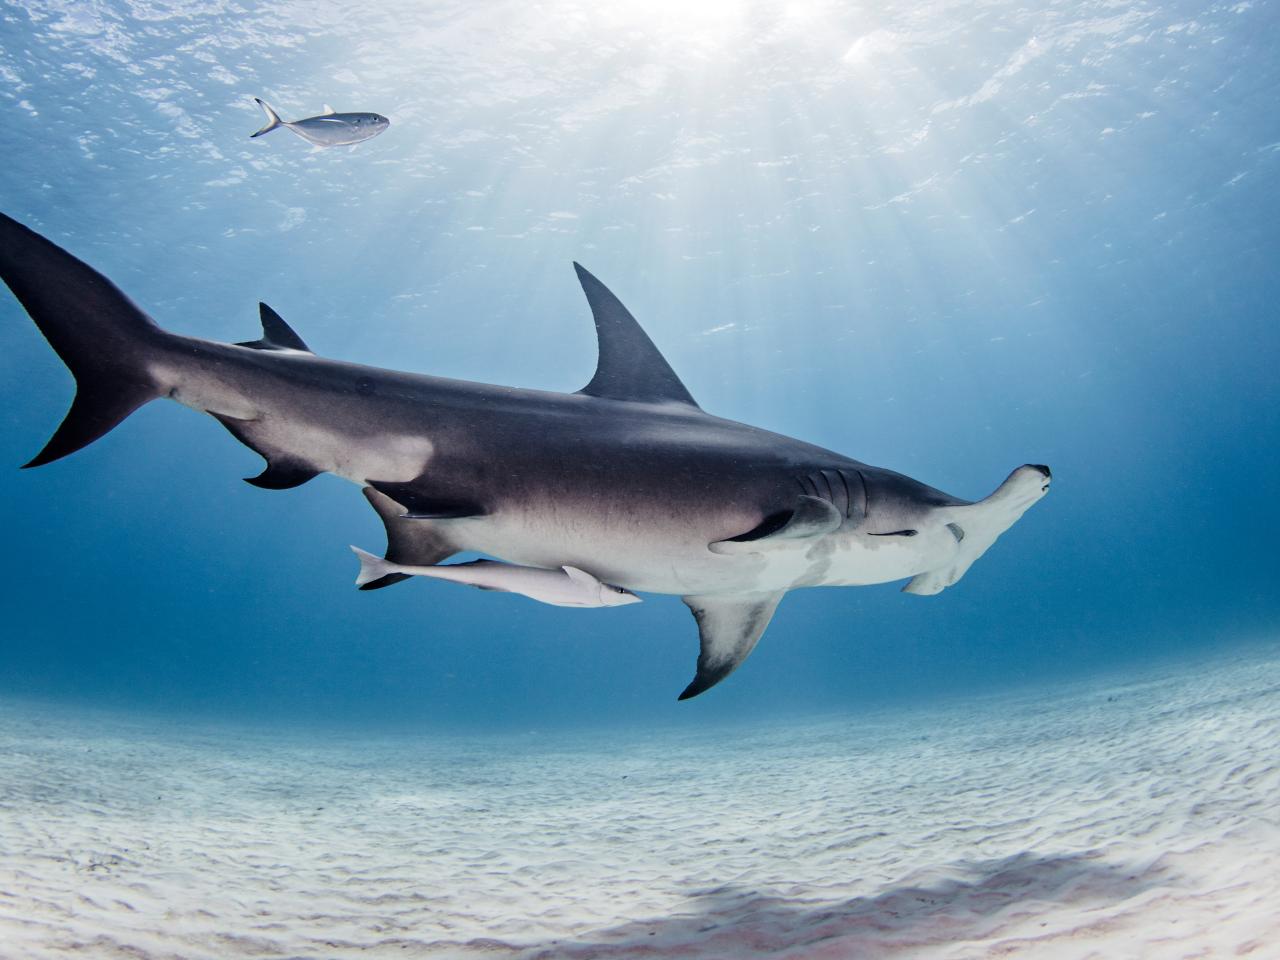 Interesting Facts About Hammerhead Sharks